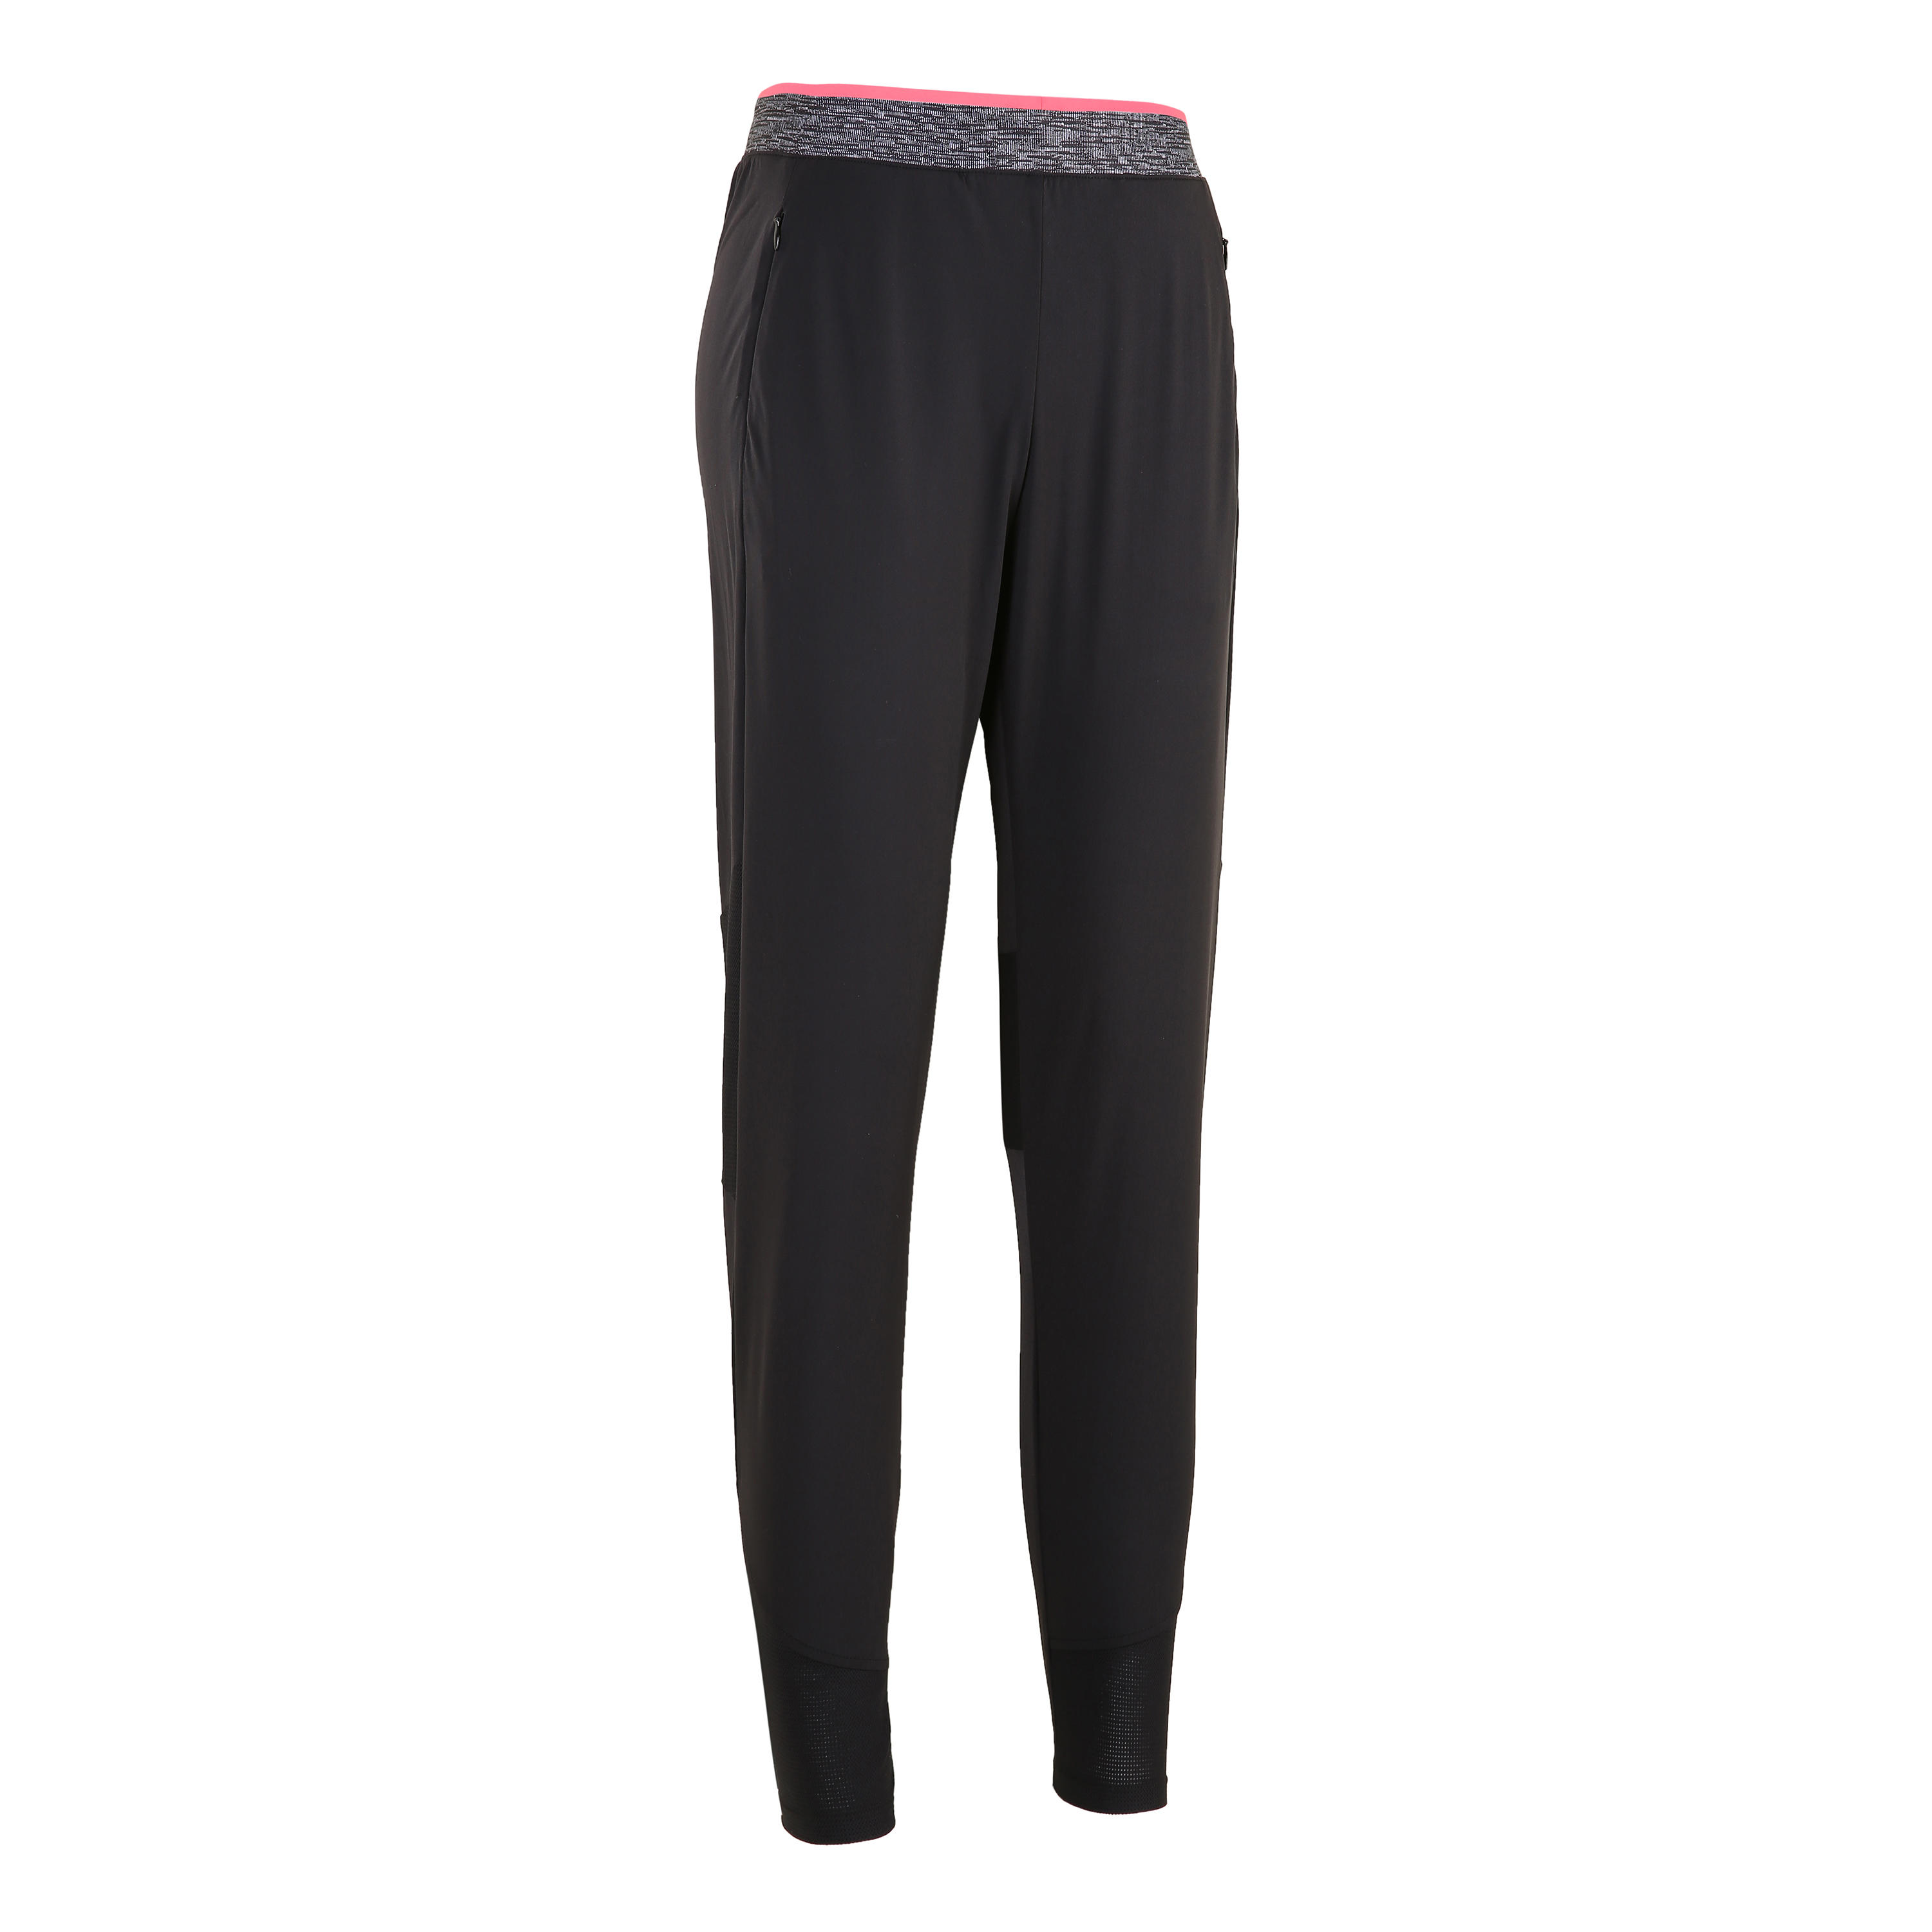 Olaian by Decathlon Solid Women Black Tights - Buy Olaian by Decathlon  Solid Women Black Tights Online at Best Prices in India | Flipkart.com